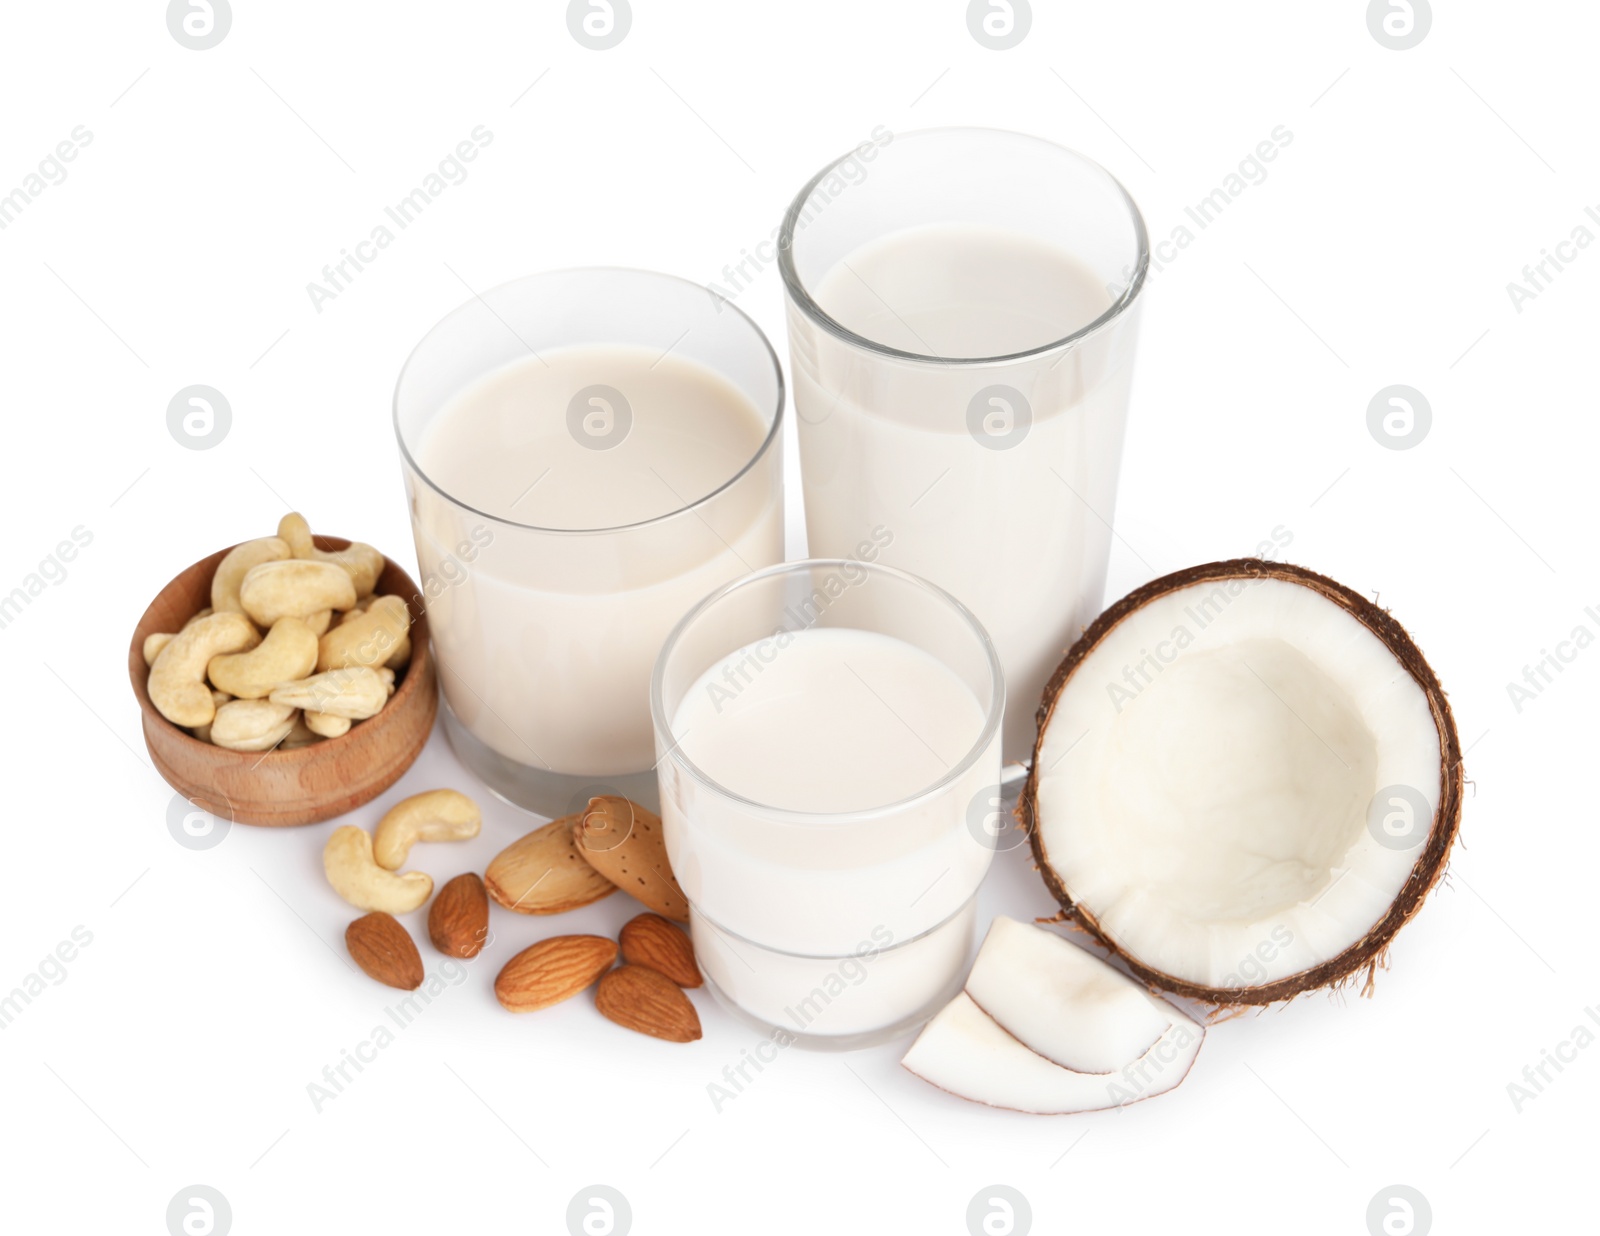 Photo of Vegan milk and different nuts on white background